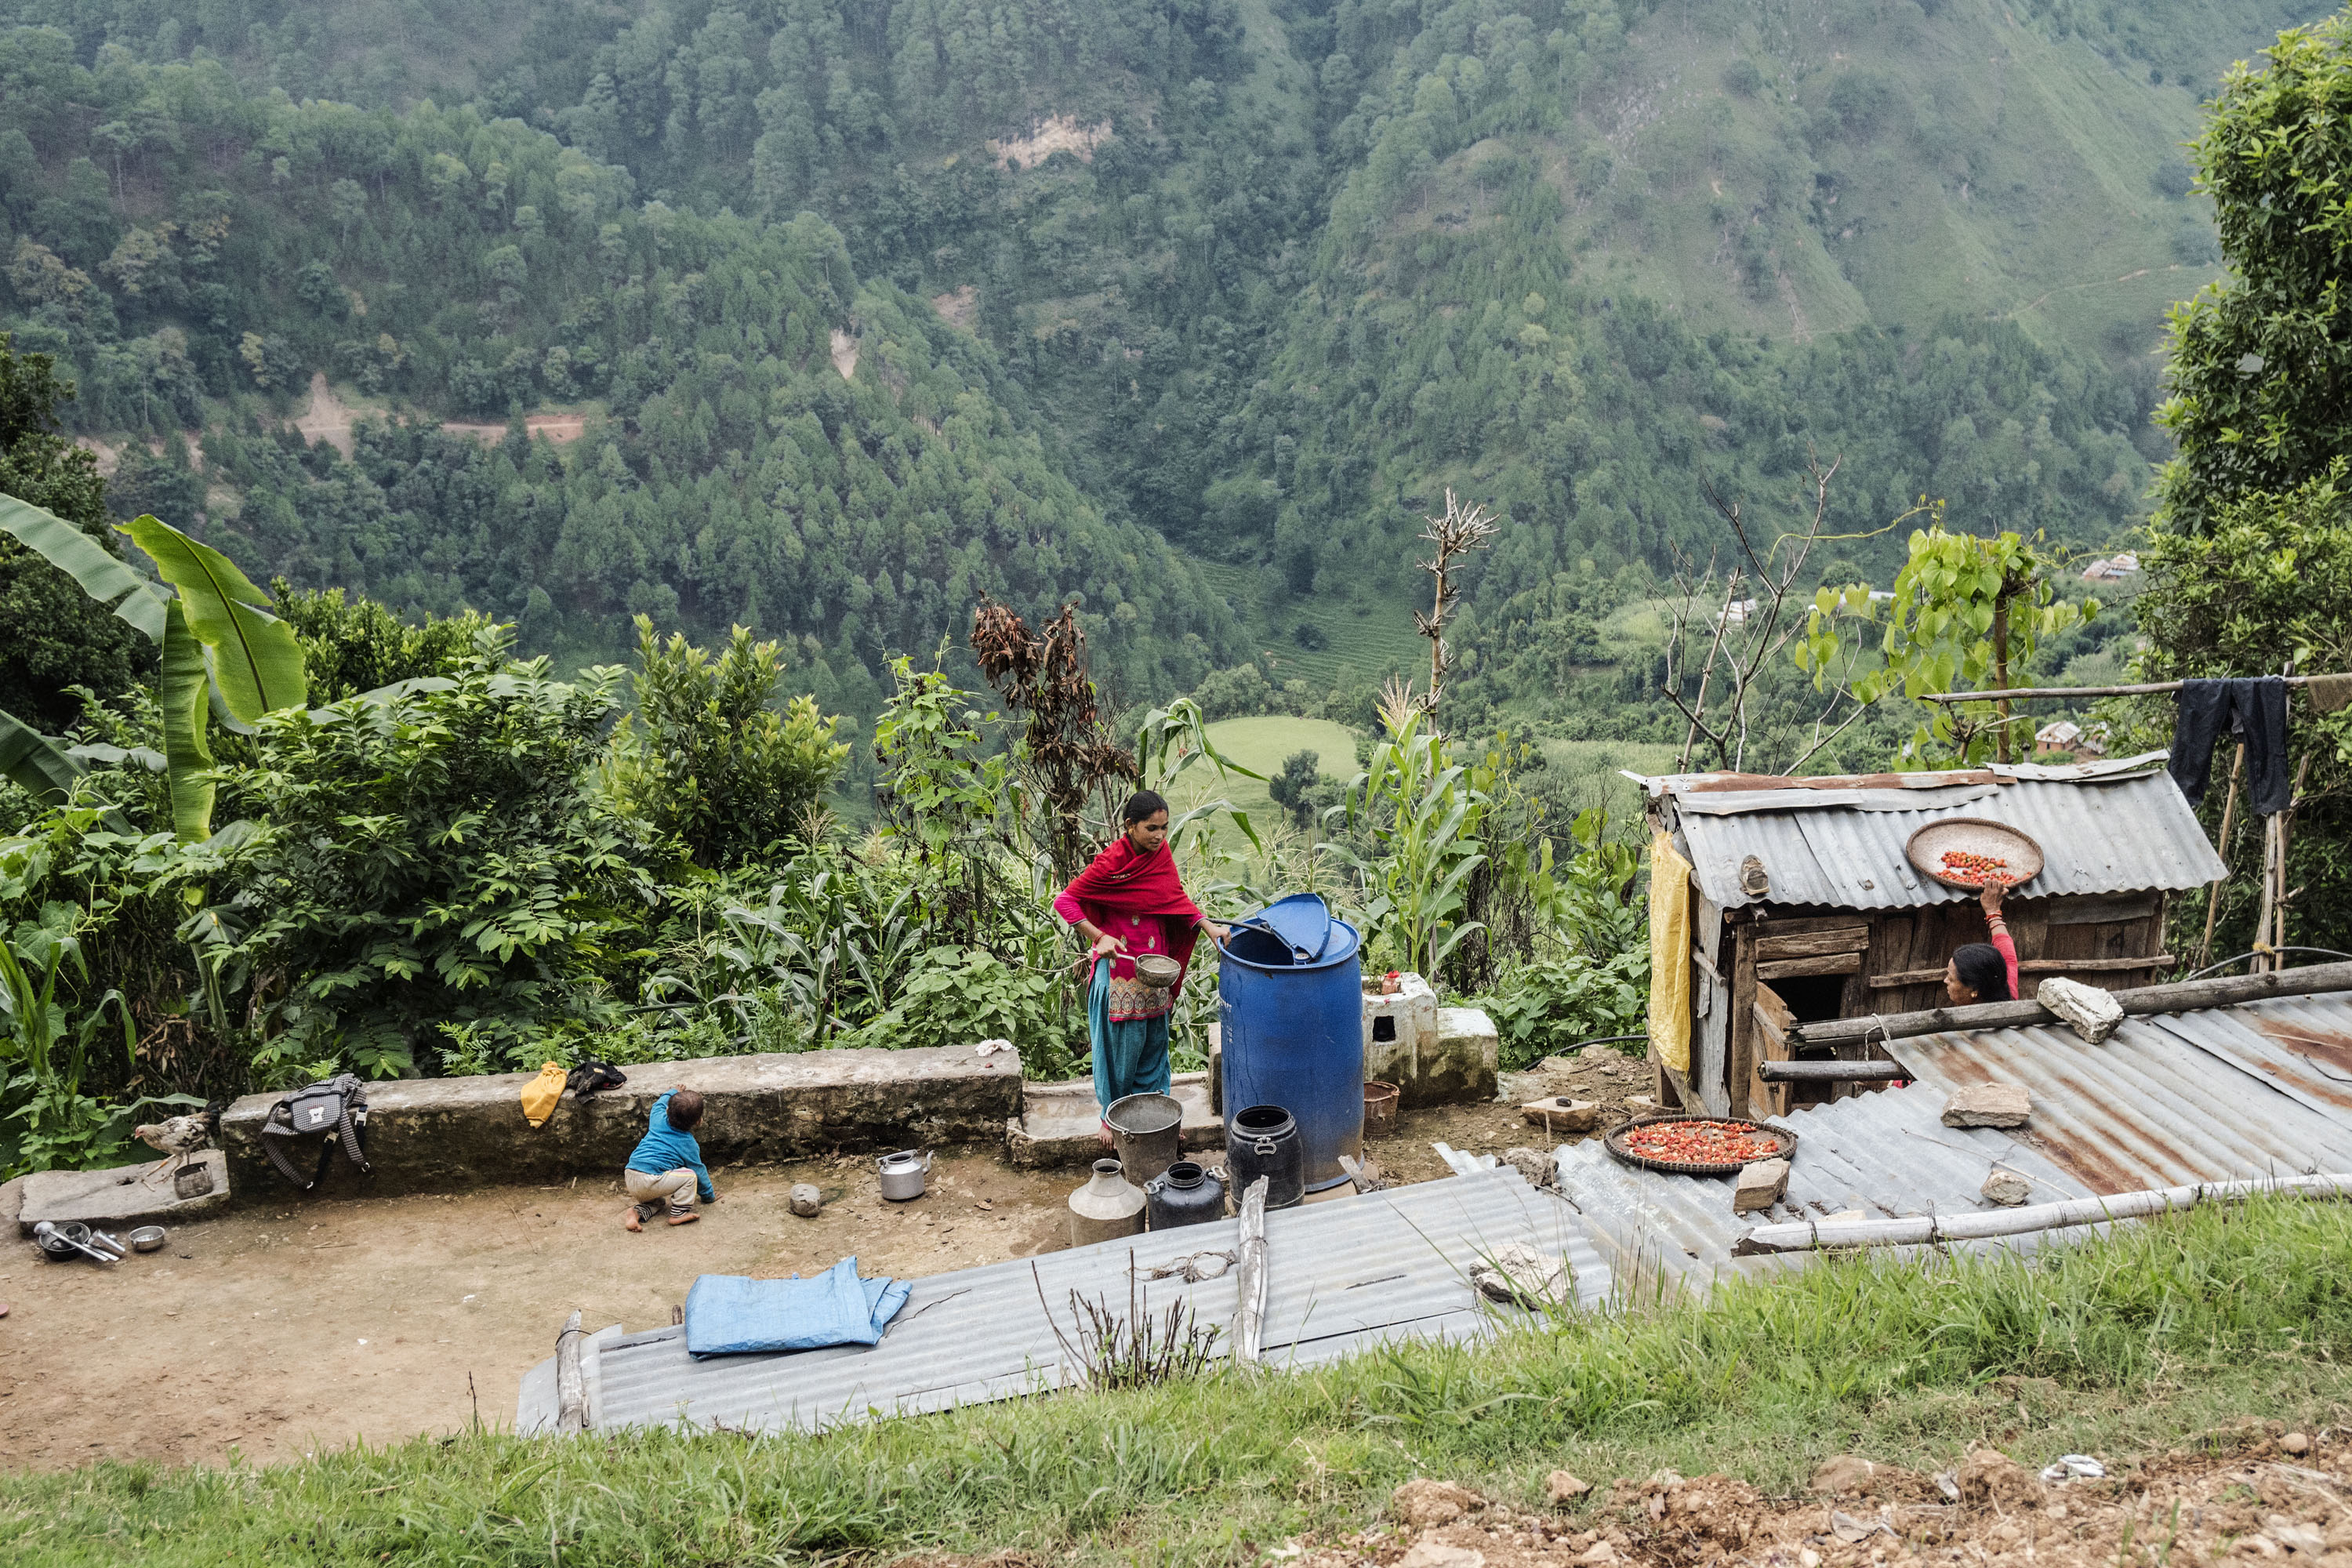 Nepal pursues a locally led adaptation approach to implement climate plans